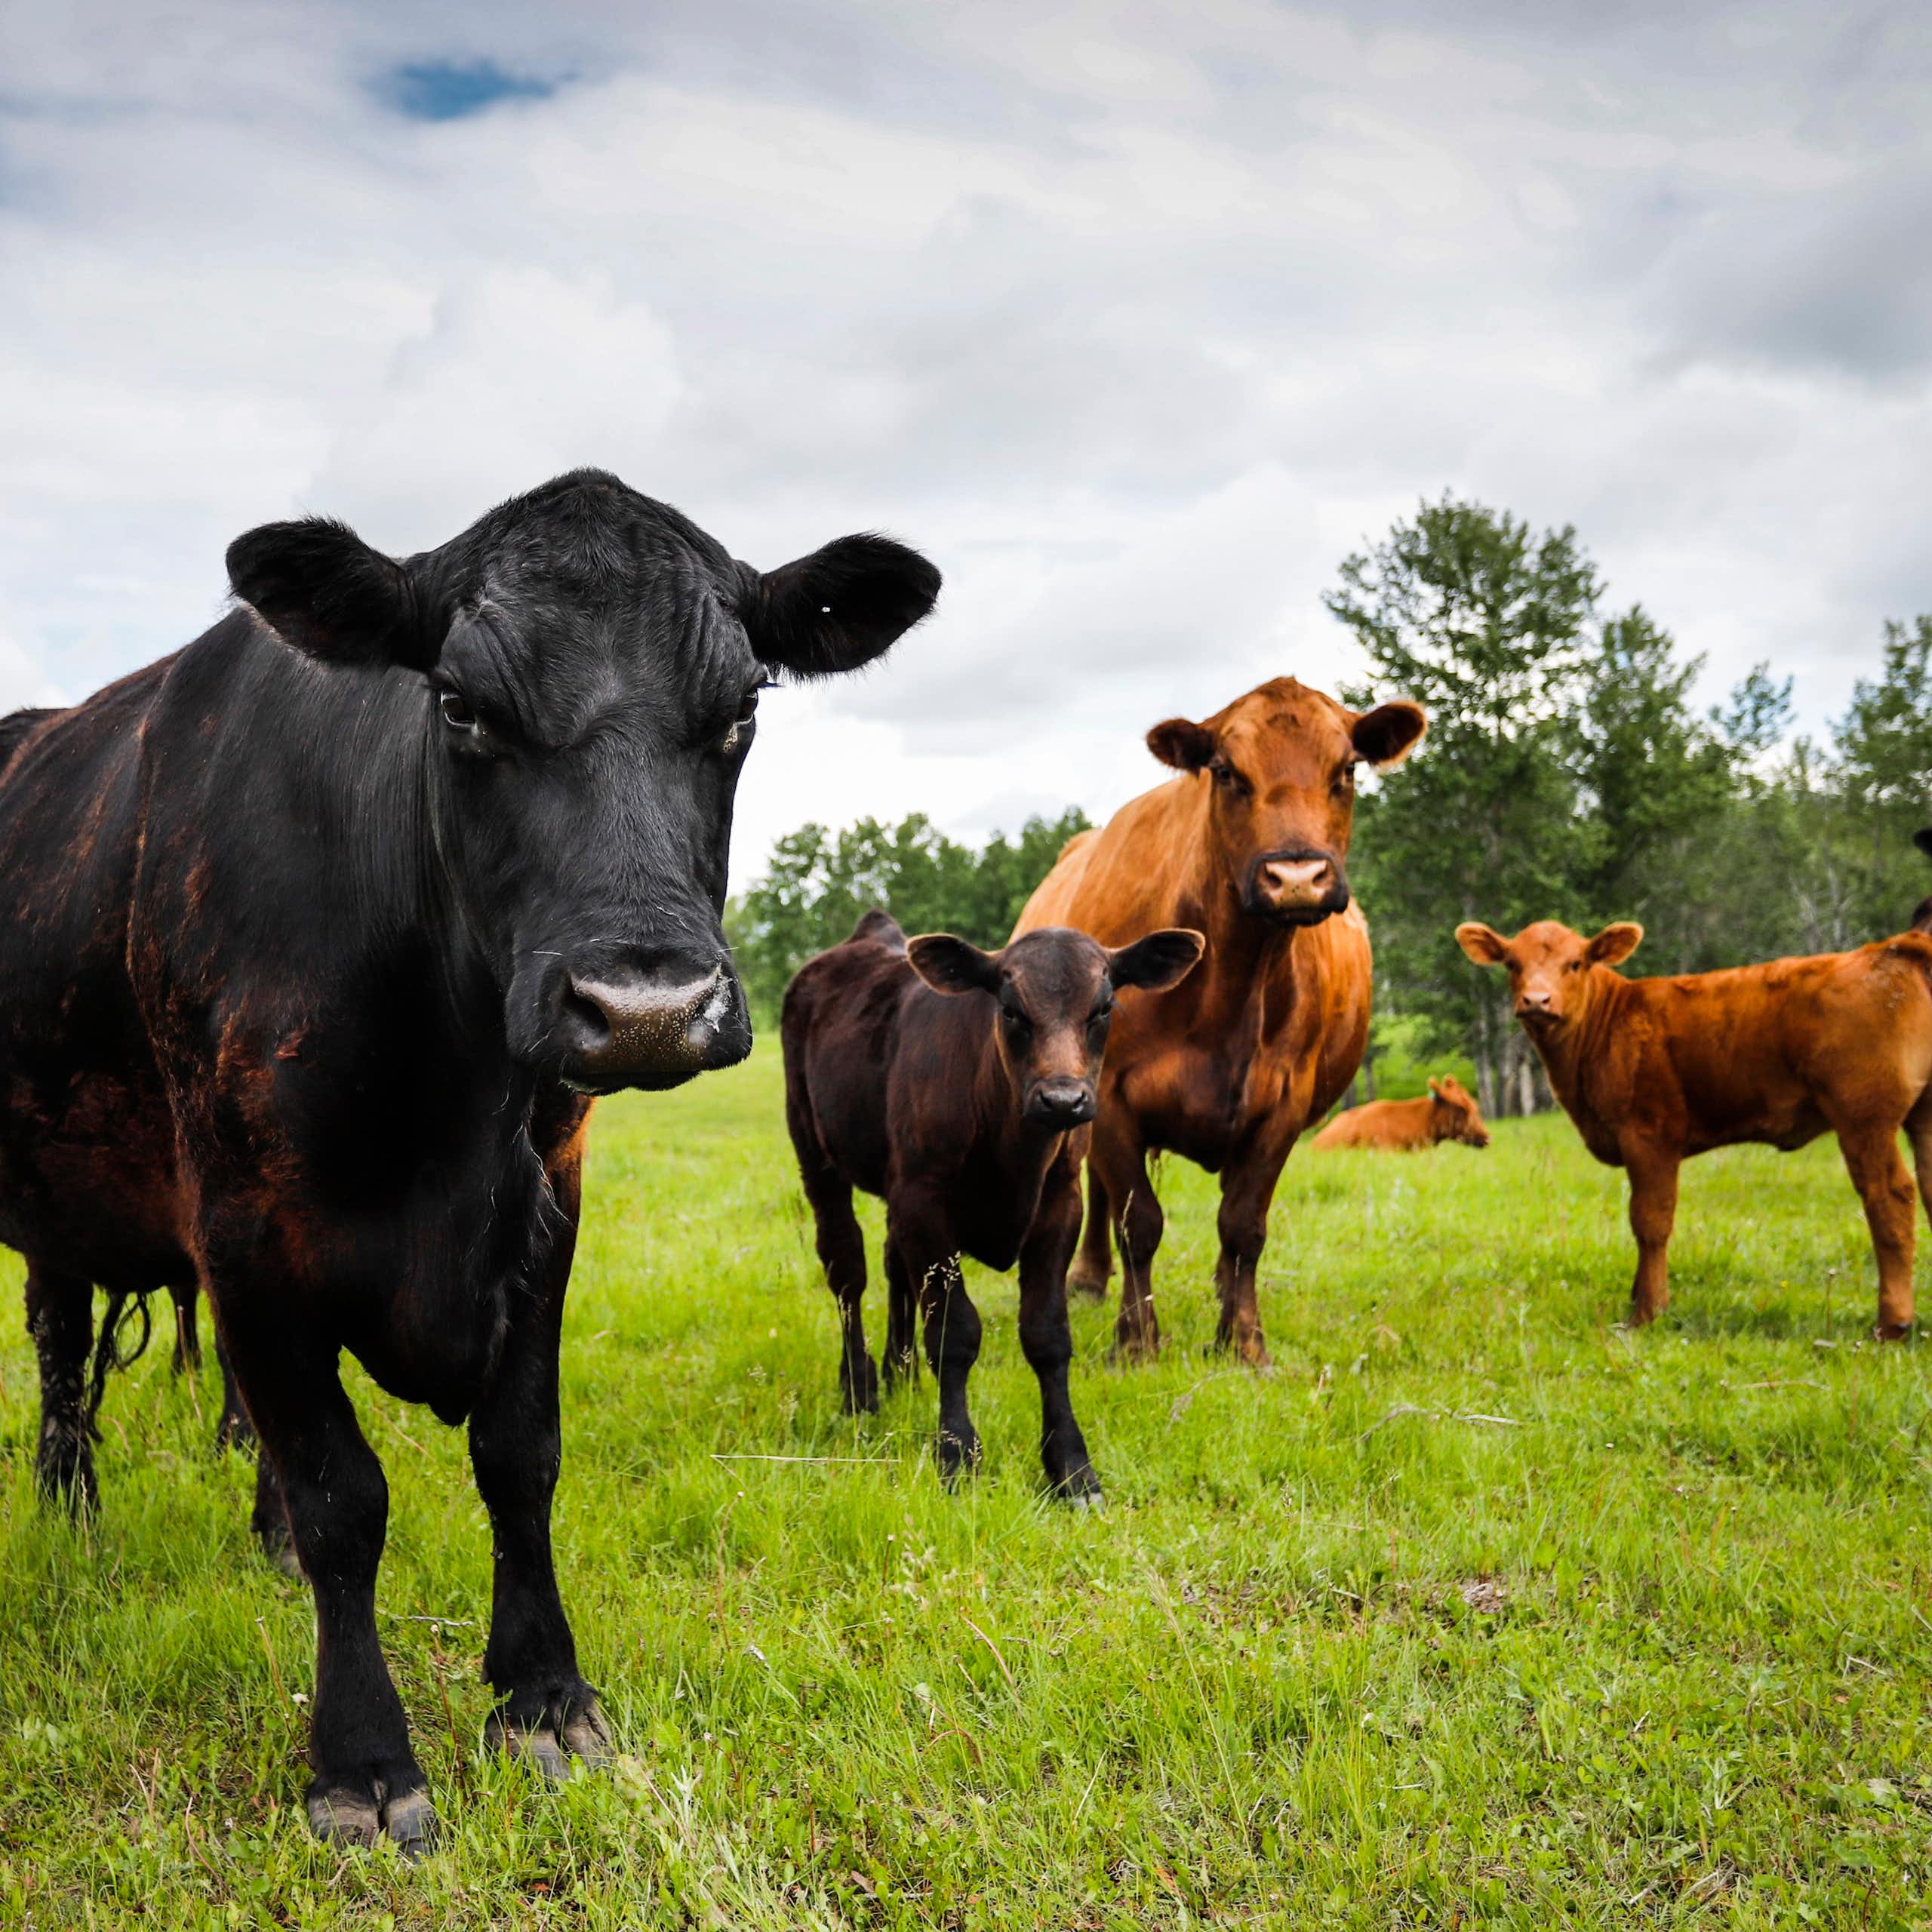 Several cows stand in a field staring into a camera.